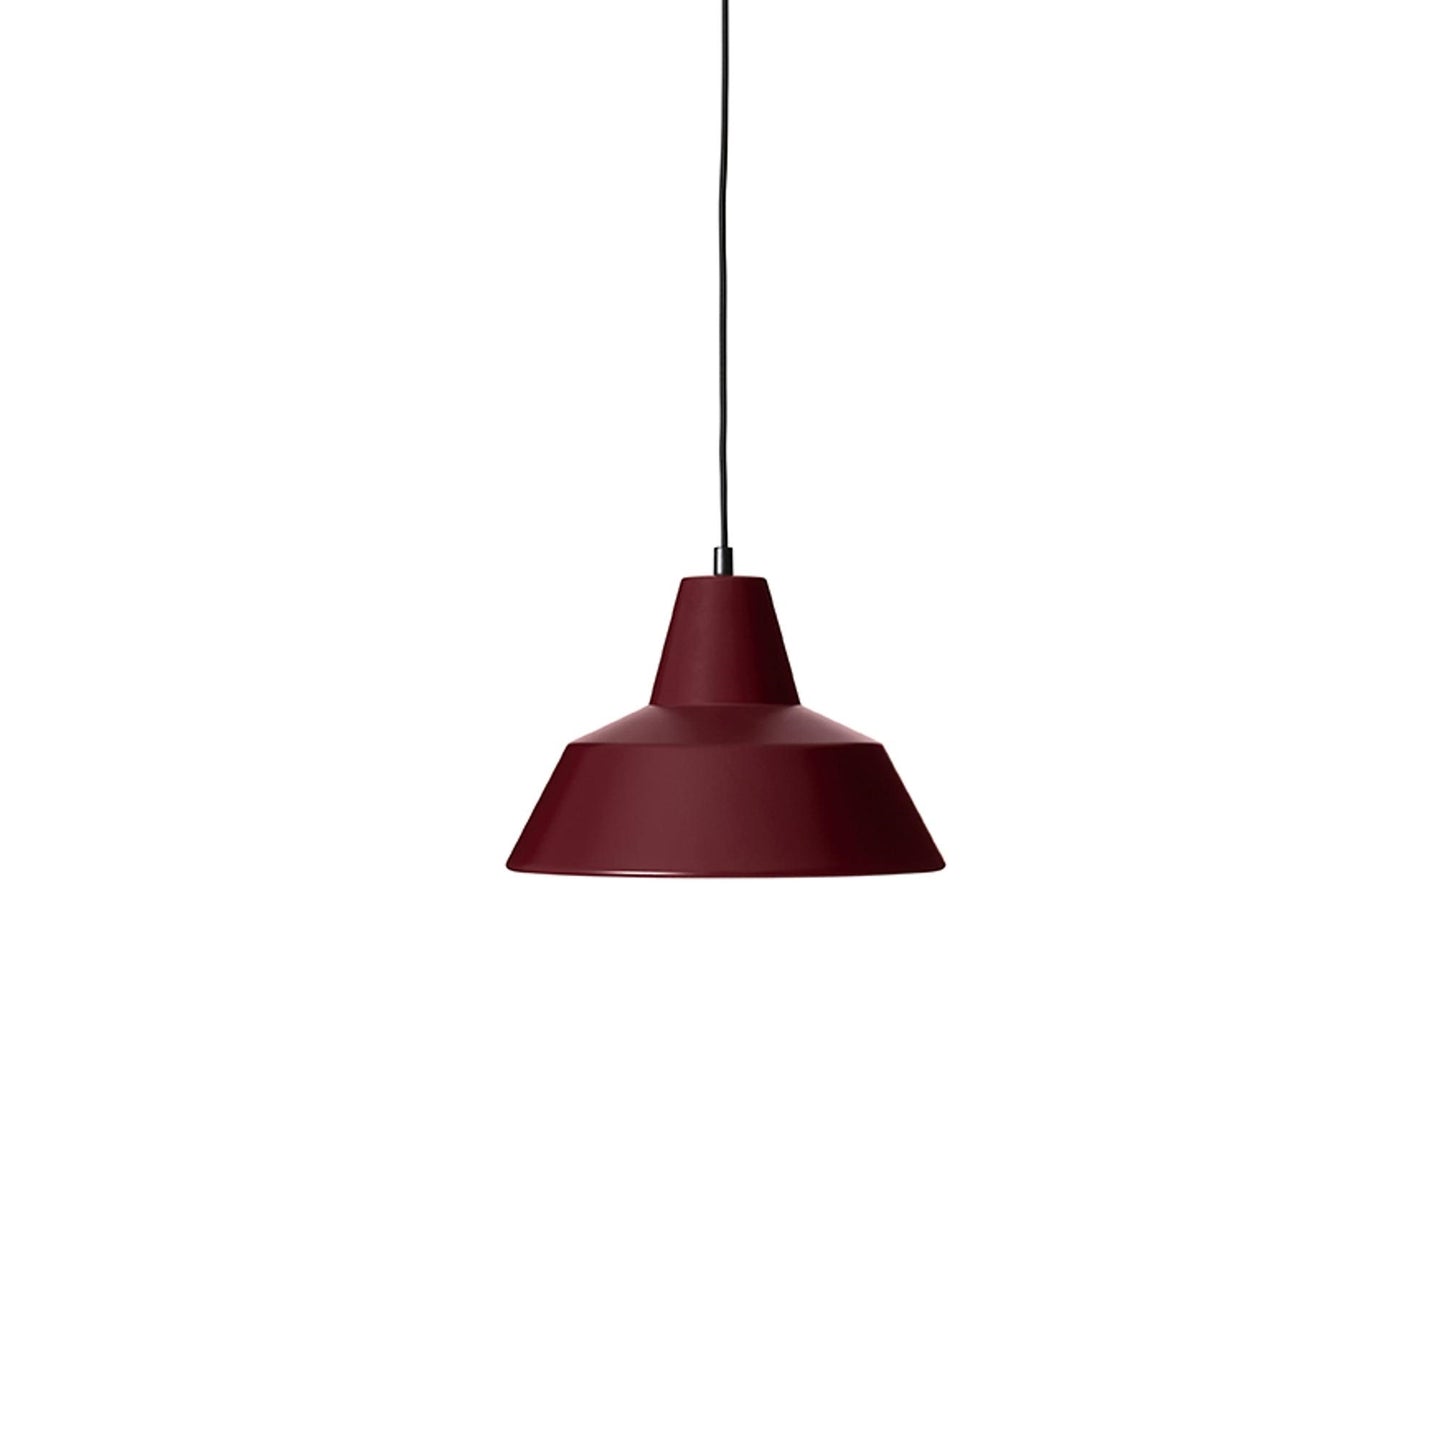 Workshop Lamp Pendant Lamp W3 by Made By Hand #Wine Red